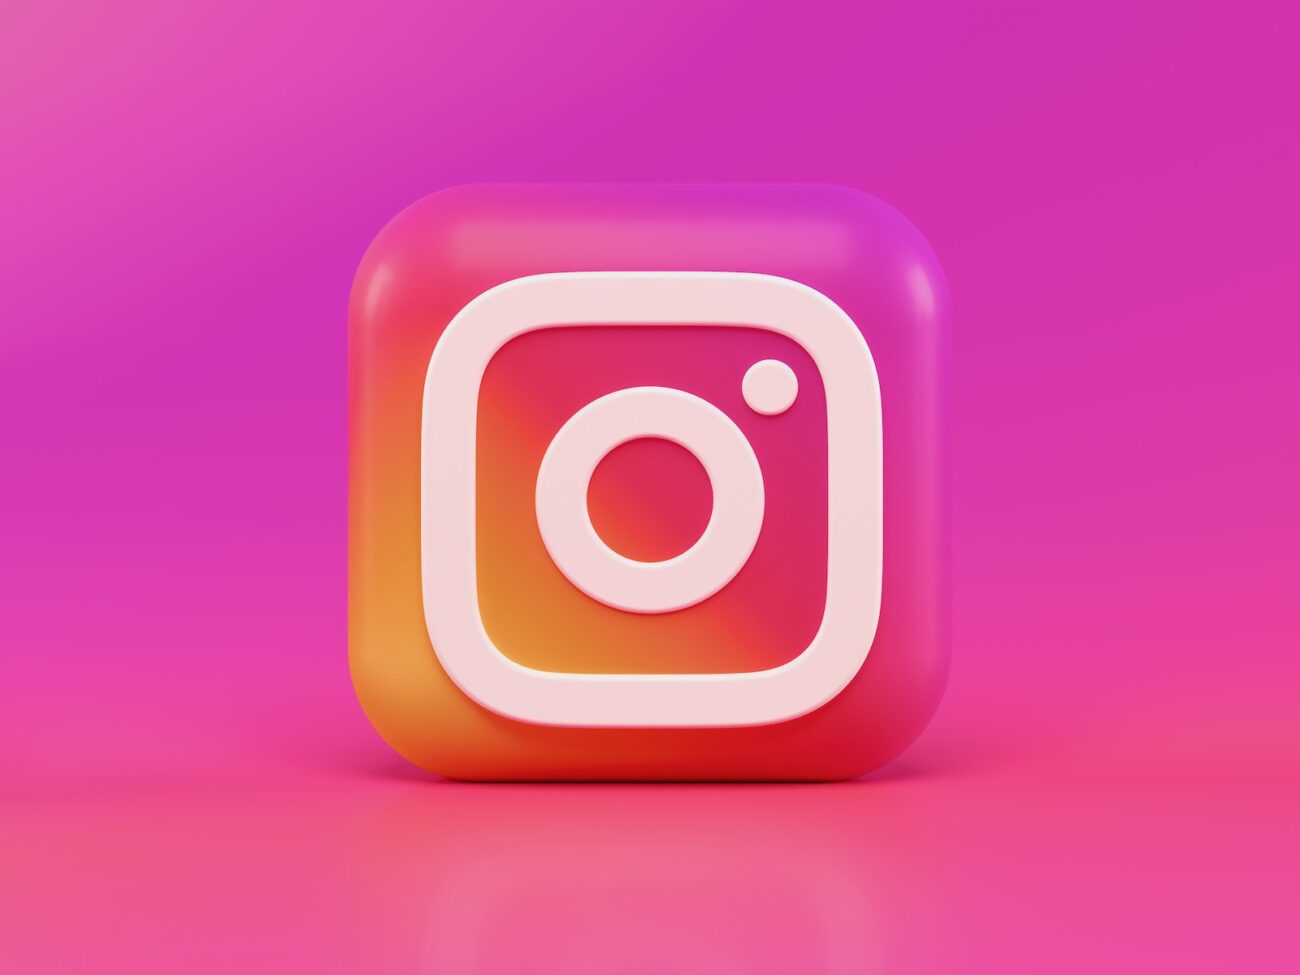 Instagram logo as a pink and white square illustration